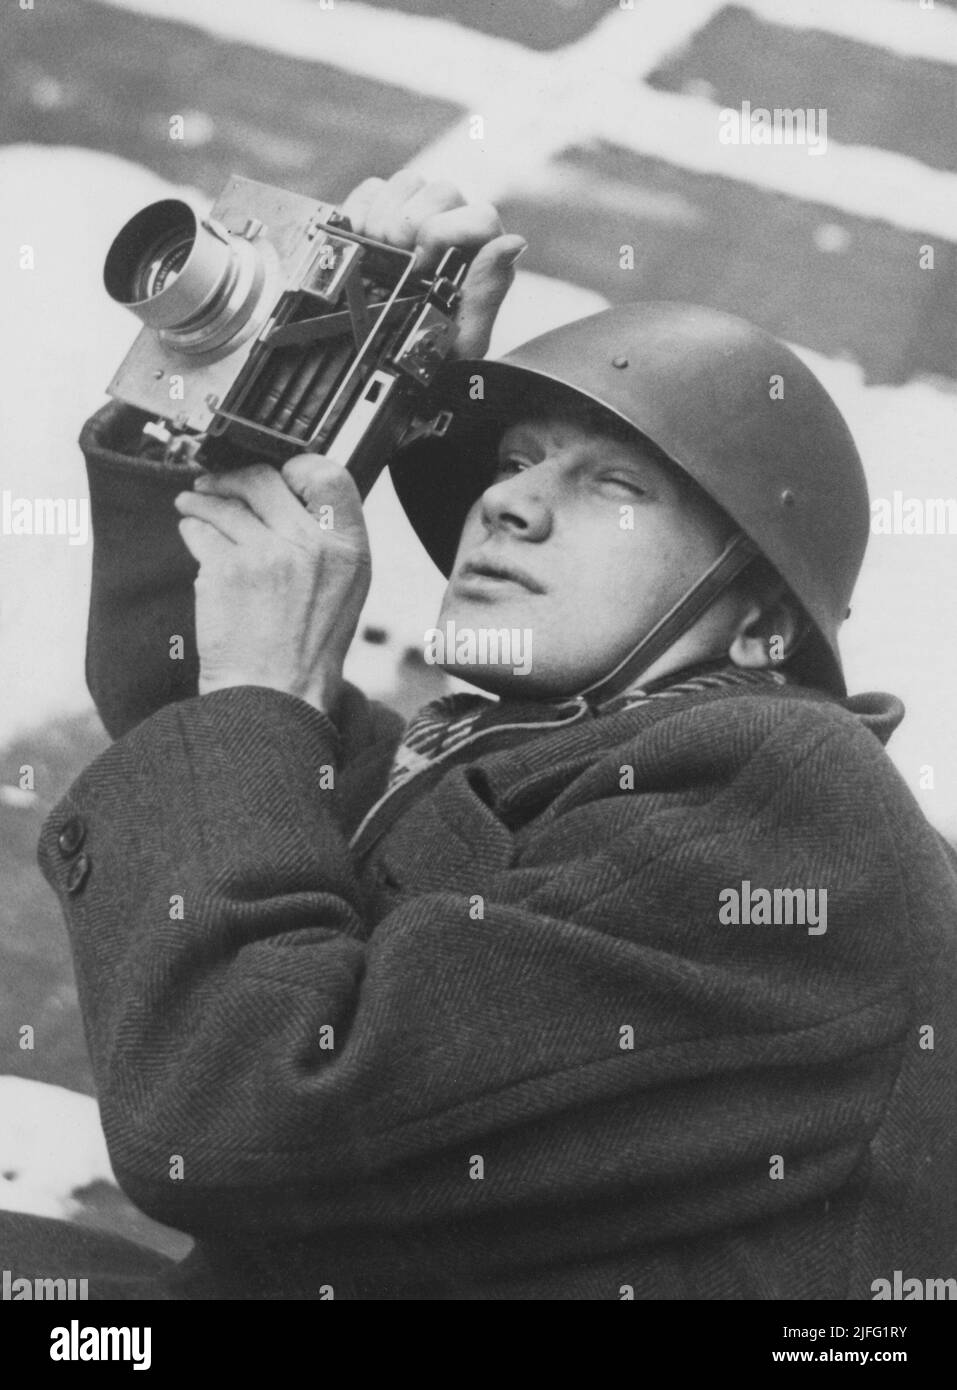 The Winter War. A military conflict between the Soviet union and Finland. It began with a Soviet invasion on november 1939 when Soviet infantery crossed the border on the Karelian Isthmus.  Pictured Karl Gustaf Kristoffersson. 1918-2011. Swedish photographer. A press photographer who in connection with the outbreak of World War II in 1939 contributed to the breakthrough of photojournalism that took place at that time. One of his first assignments was to document the Winter War in Finland 1939-1930. He was the youngest war-photographer in Finland, just 21 years old.  Here with camera. Stock Photo